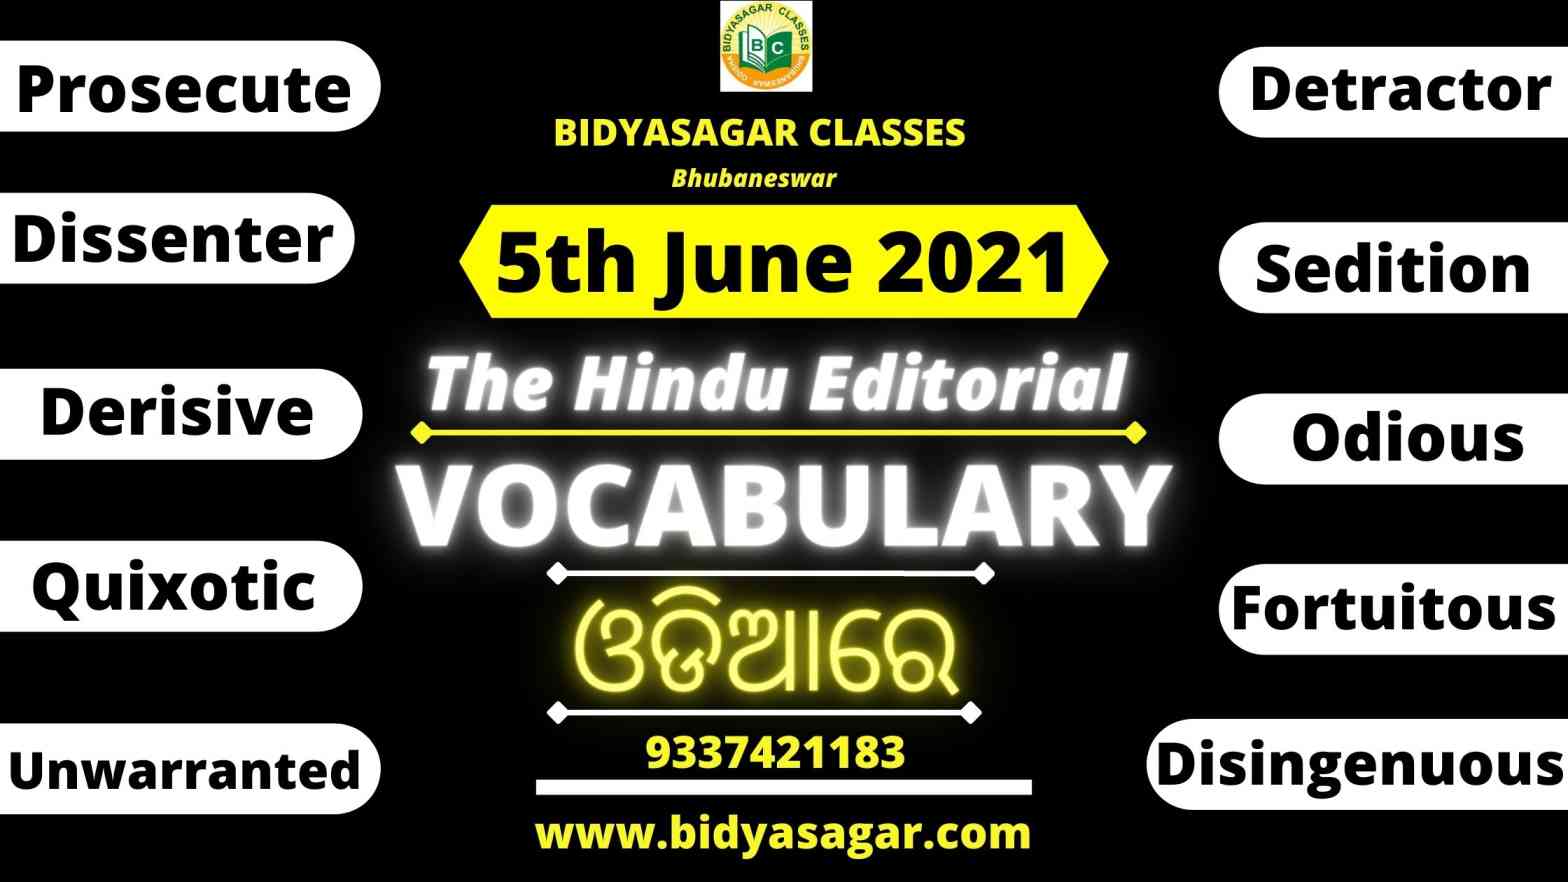 The Hindu Editorial Vocabulary of 5th June 2021